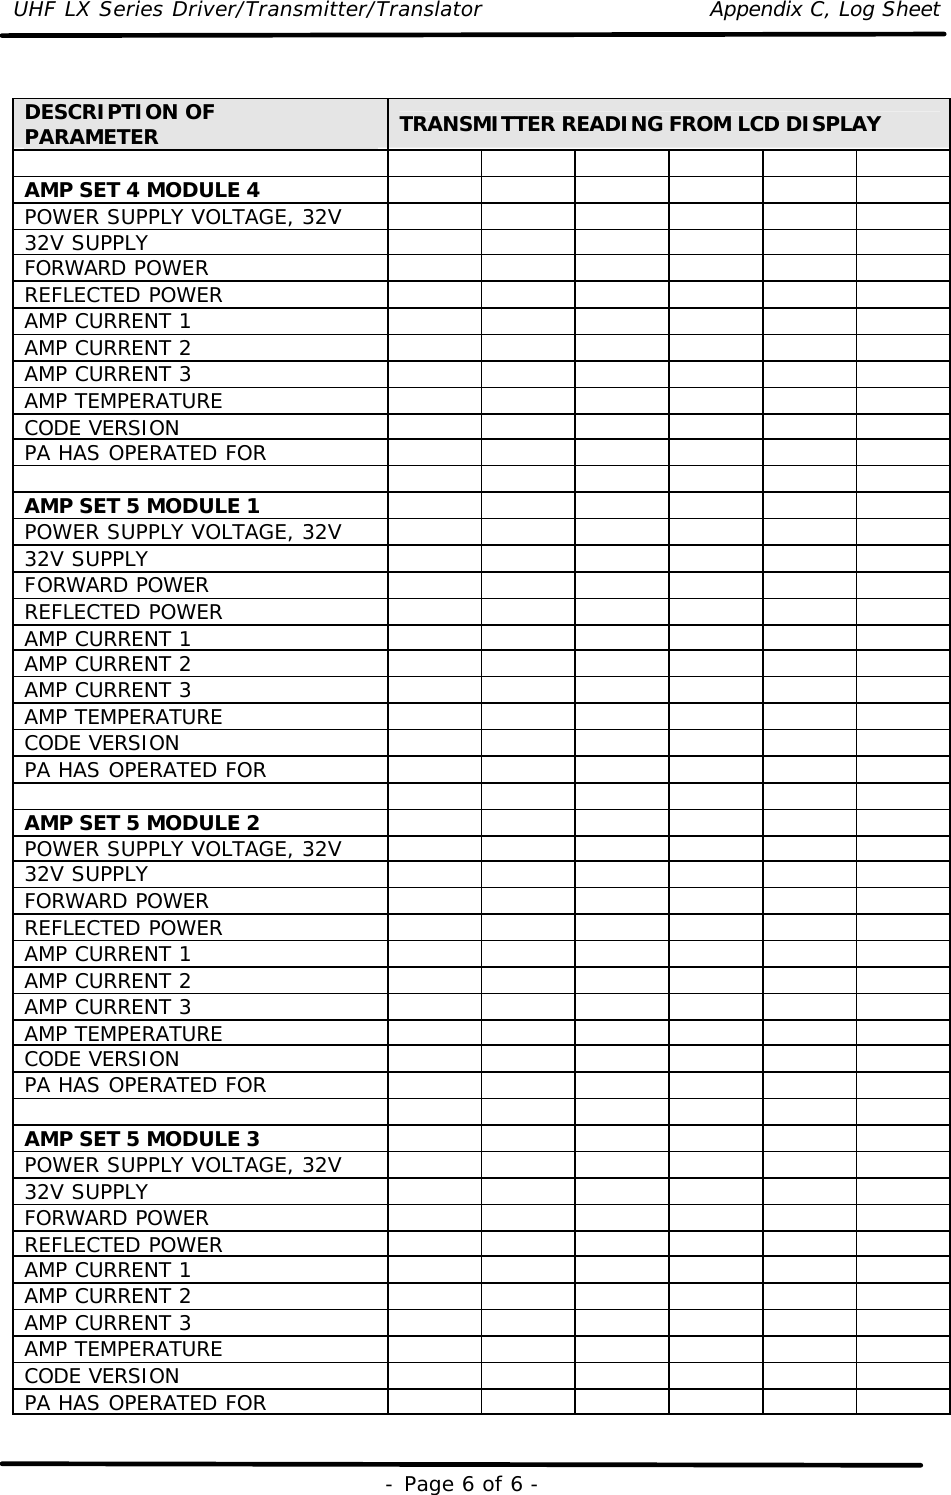 UHF LX Series Driver/Transmitter/Translator Appendix C, Log Sheet   - Page 6 of 6 -  DESCRIPTION OF PARAMETER TRANSMITTER READING FROM LCD DISPLAY         AMP SET 4 MODULE 4       POWER SUPPLY VOLTAGE, 32V       32V SUPPLY        FORWARD POWER        REFLECTED POWER        AMP CURRENT 1        AMP CURRENT 2        AMP CURRENT 3        AMP TEMPERATURE        CODE VERSION        PA HAS OPERATED FOR                AMP SET 5 MODULE 1       POWER SUPPLY VOLTAGE, 32V       32V SUPPLY        FORWARD POWER        REFLECTED POWER        AMP CURRENT 1        AMP CURRENT 2        AMP CURRENT 3        AMP TEMPERATURE        CODE VERSION        PA HAS OPERATED FOR               AMP SET 5 MODULE 2       POWER SUPPLY VOLTAGE, 32V       32V SUPPLY        FORWARD POWER        REFLECTED POWER        AMP CURRENT 1        AMP CURRENT 2        AMP CURRENT 3        AMP TEMPERATURE        CODE VERSION        PA HAS OPERATED FOR                AMP SET 5 MODULE 3       POWER SUPPLY VOLTAGE, 32V       32V SUPPLY        FORWARD POWER        REFLECTED POWER        AMP CURRENT 1        AMP CURRENT 2        AMP CURRENT 3        AMP TEMPERATURE        CODE VERSION        PA HAS OPERATED FOR        